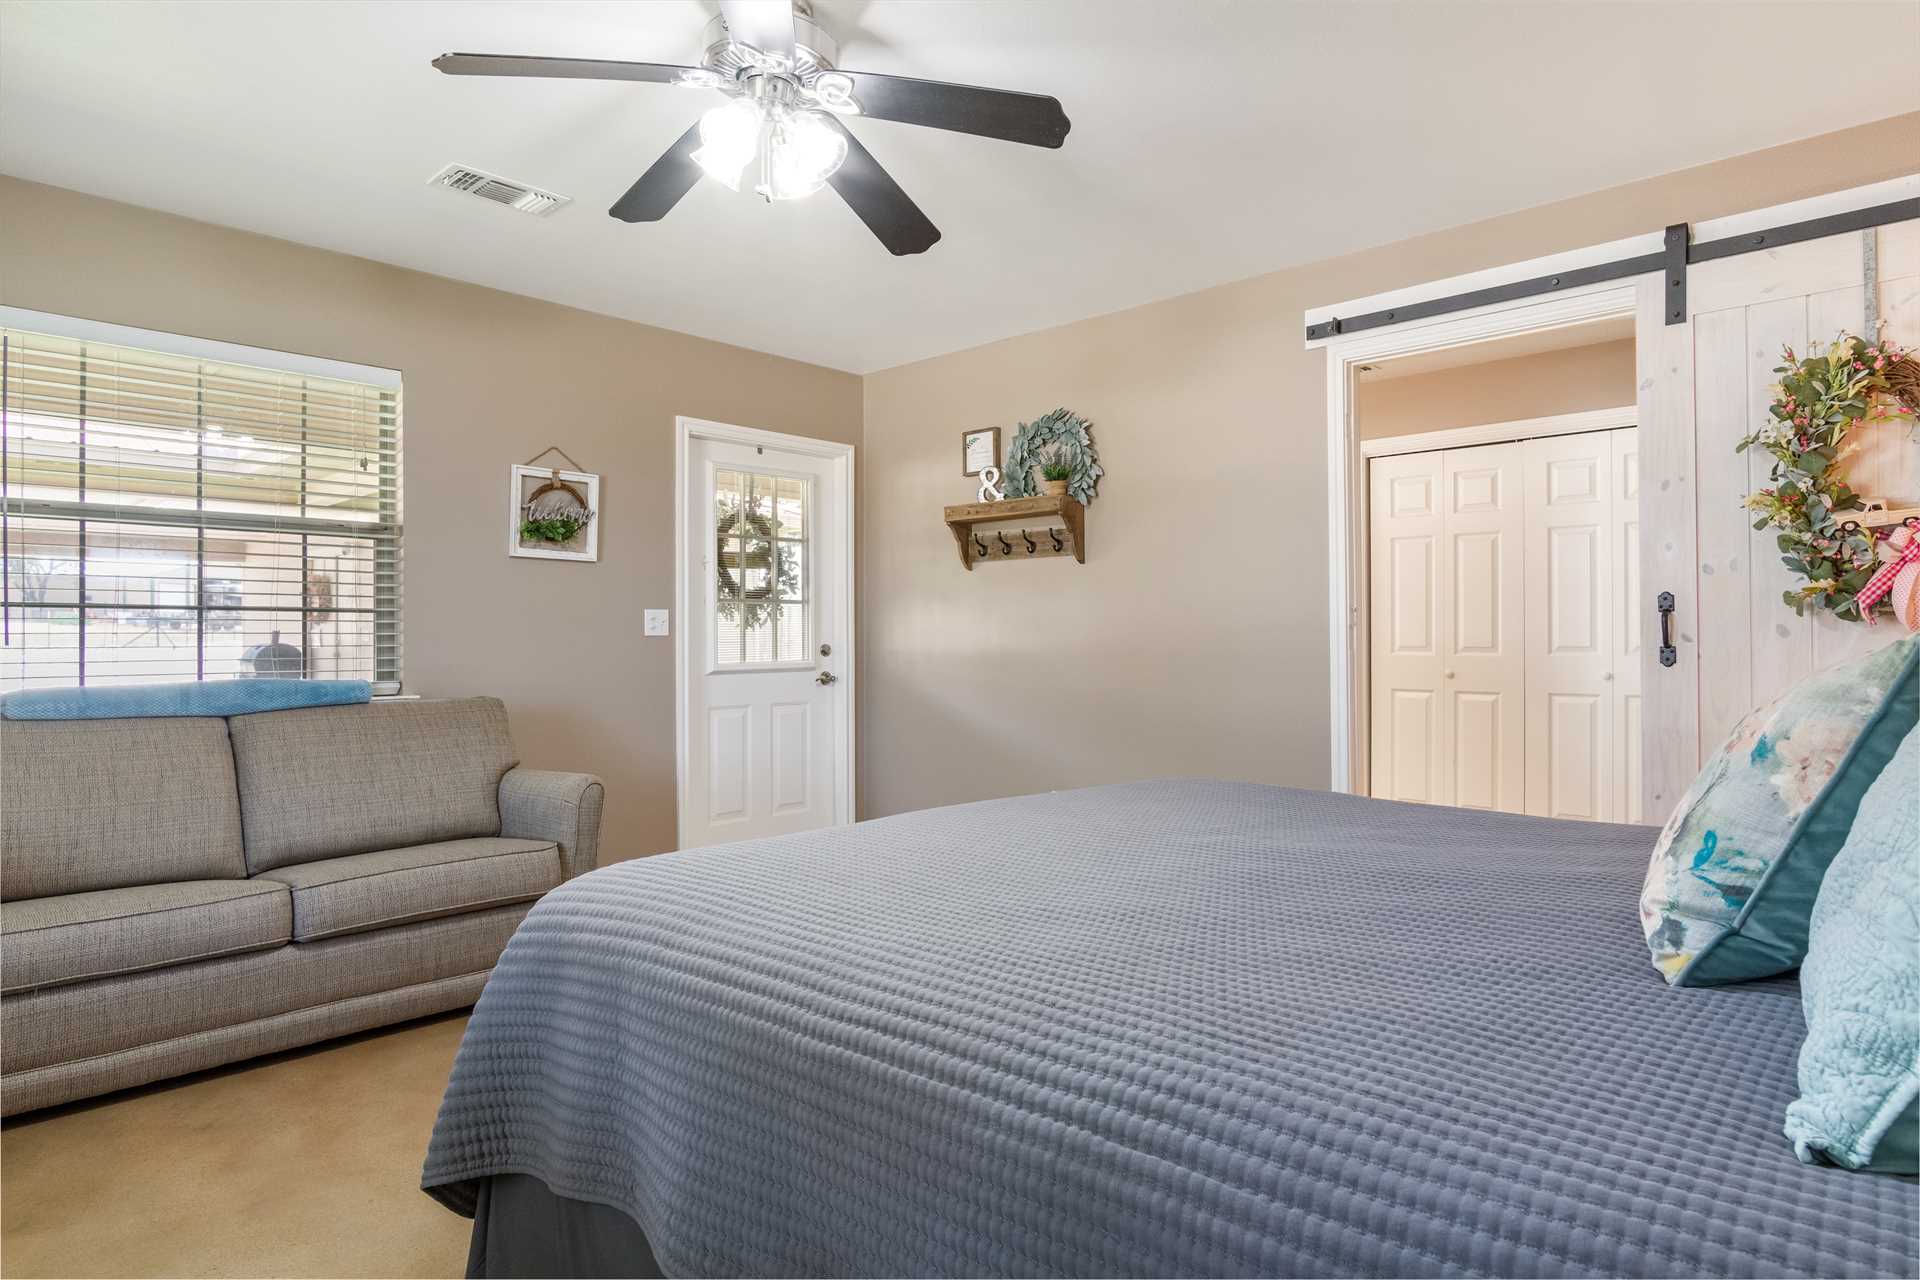                                                 Two of the three bedrooms here have private doors that open onto the shaded patio.